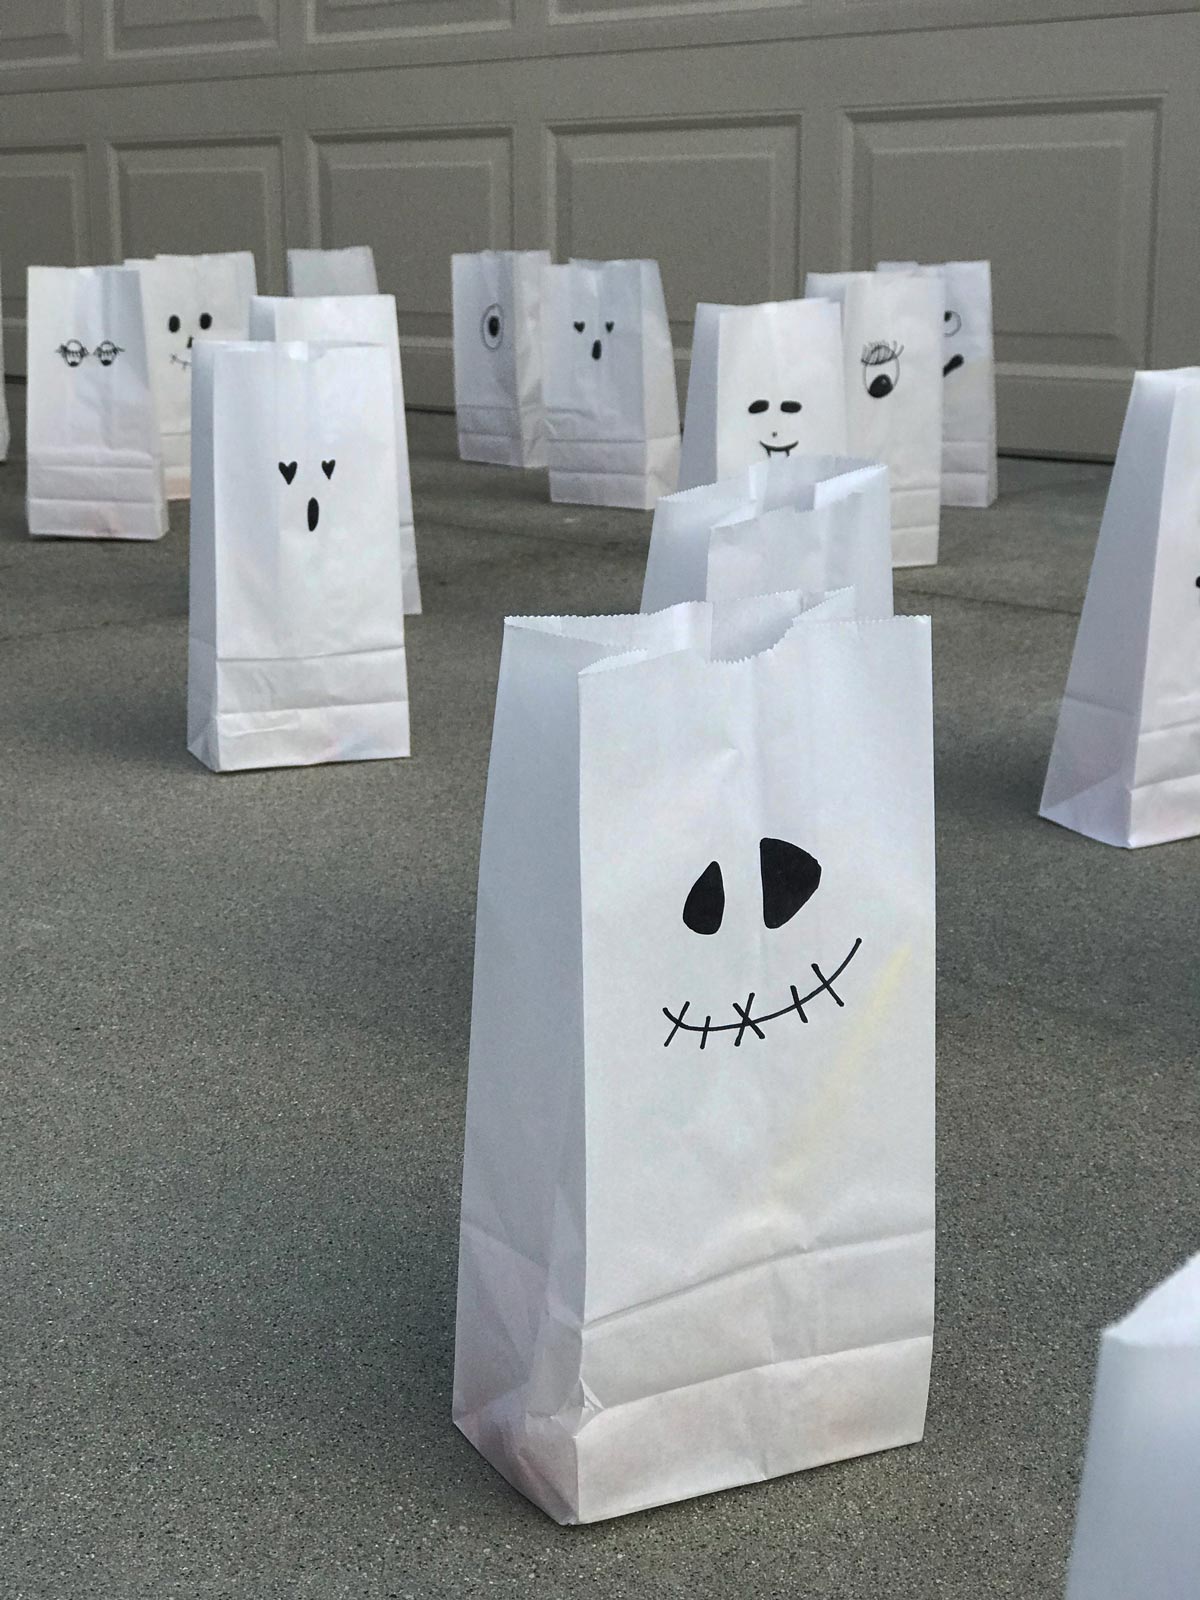 white paper bag ghosts set up on driveaway in an array, one looks like Jack Skeleton.